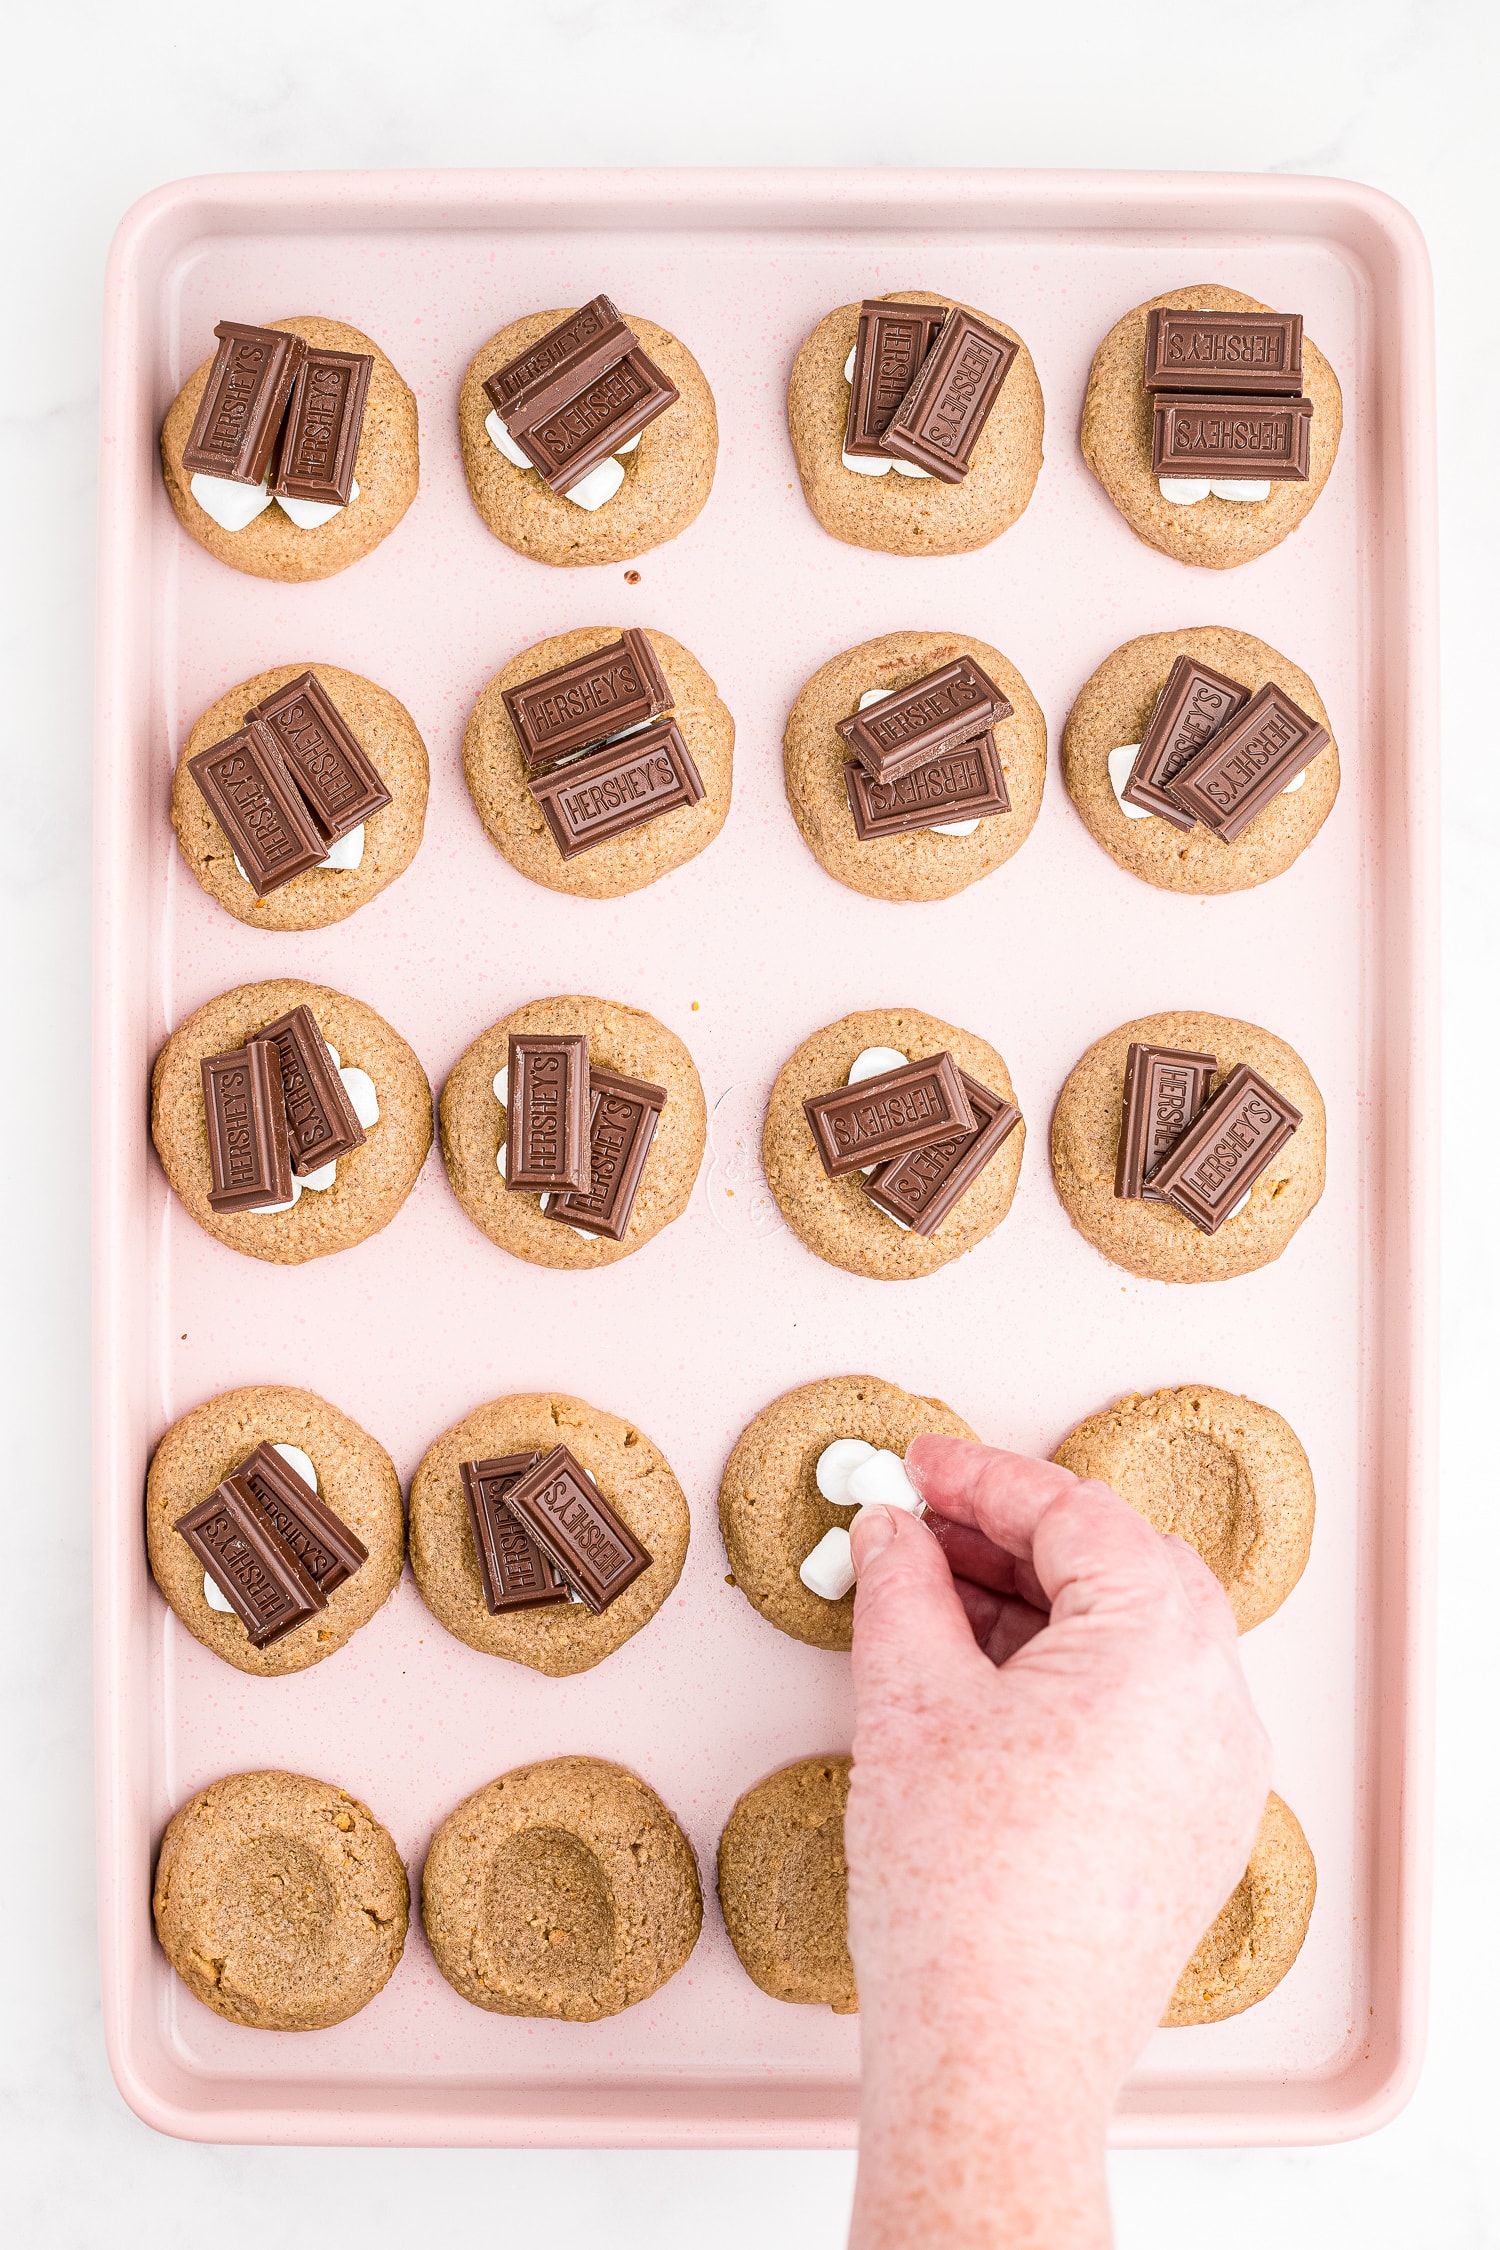 Hand placing chocolate bars on top of cookies.